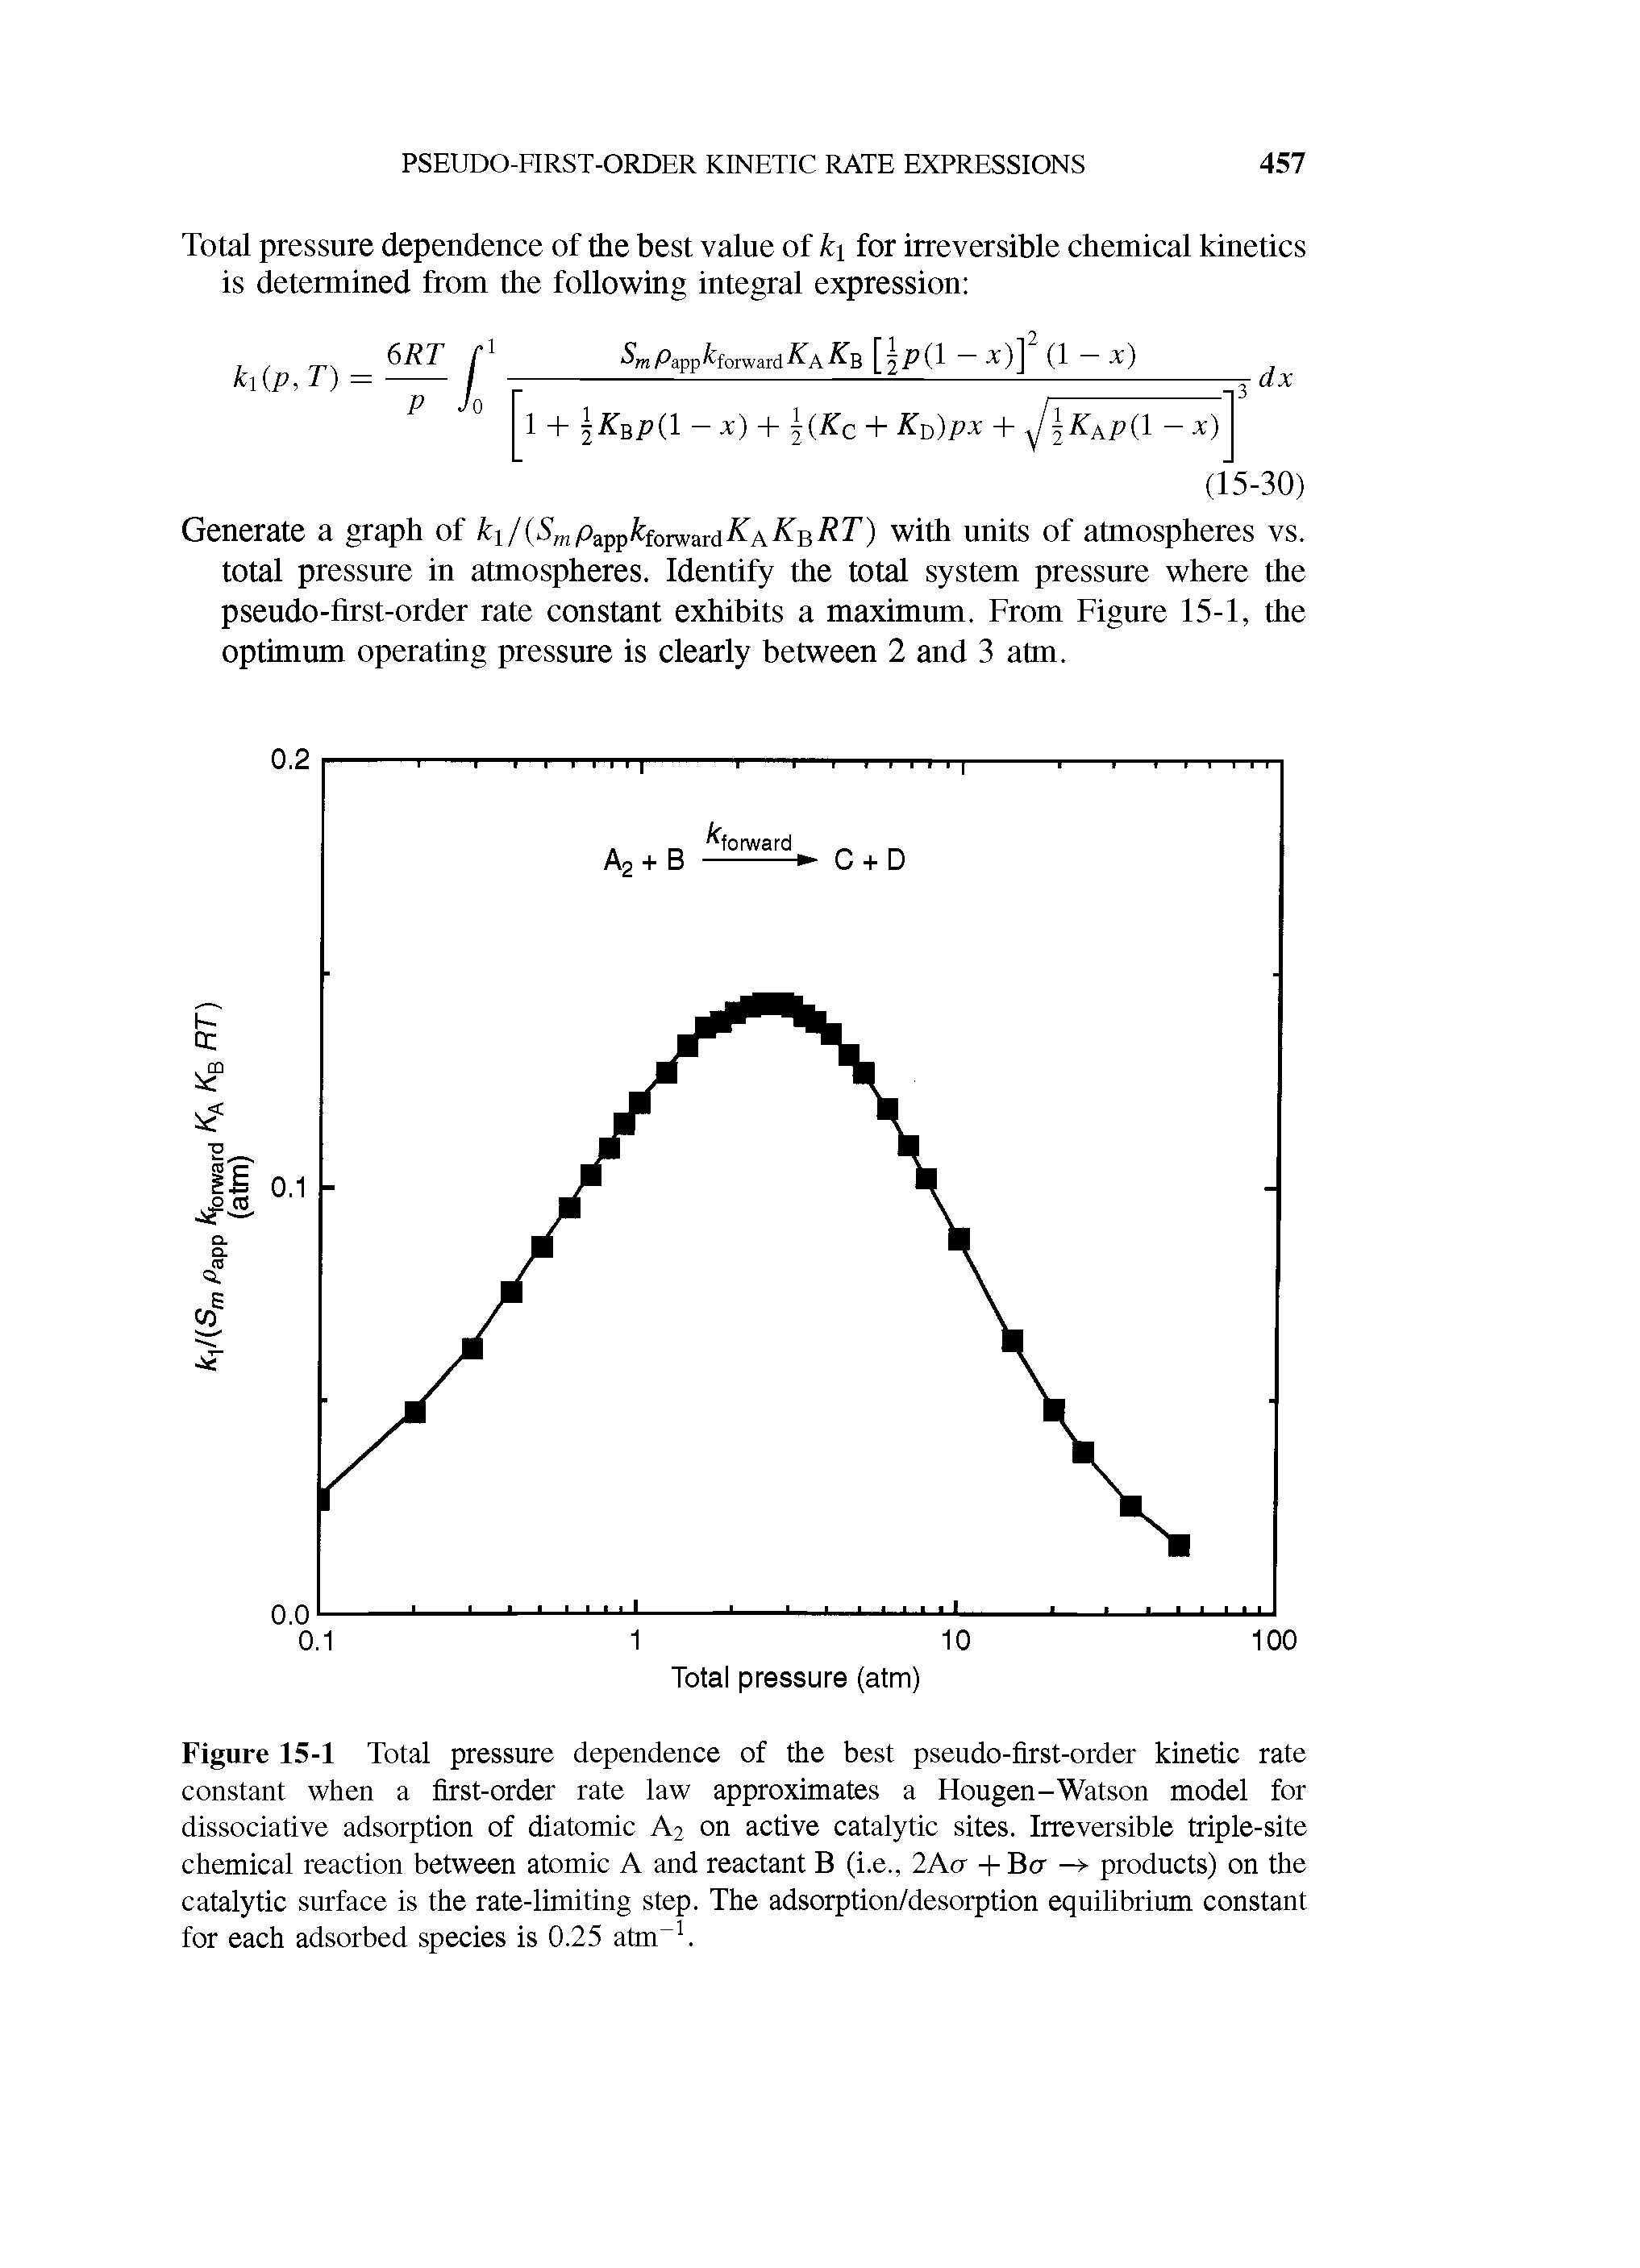 Figure 15-1 Total pressure dependence of the best pseudo-first-order kinetic rate constant when a first-order rate law approximates a Hougen-Watson model for dissociative adsorption of diatomic A2 on active catalytic sites. Irreversible triple-site chemical reaction between atomic A and reactant B (i.e., 2Acr - - Bcr -> products) on the catalytic surface is the rate-limiting step. The adsorption/desorption equilibrium constant for each adsorbed species is 0.25 atm. ...